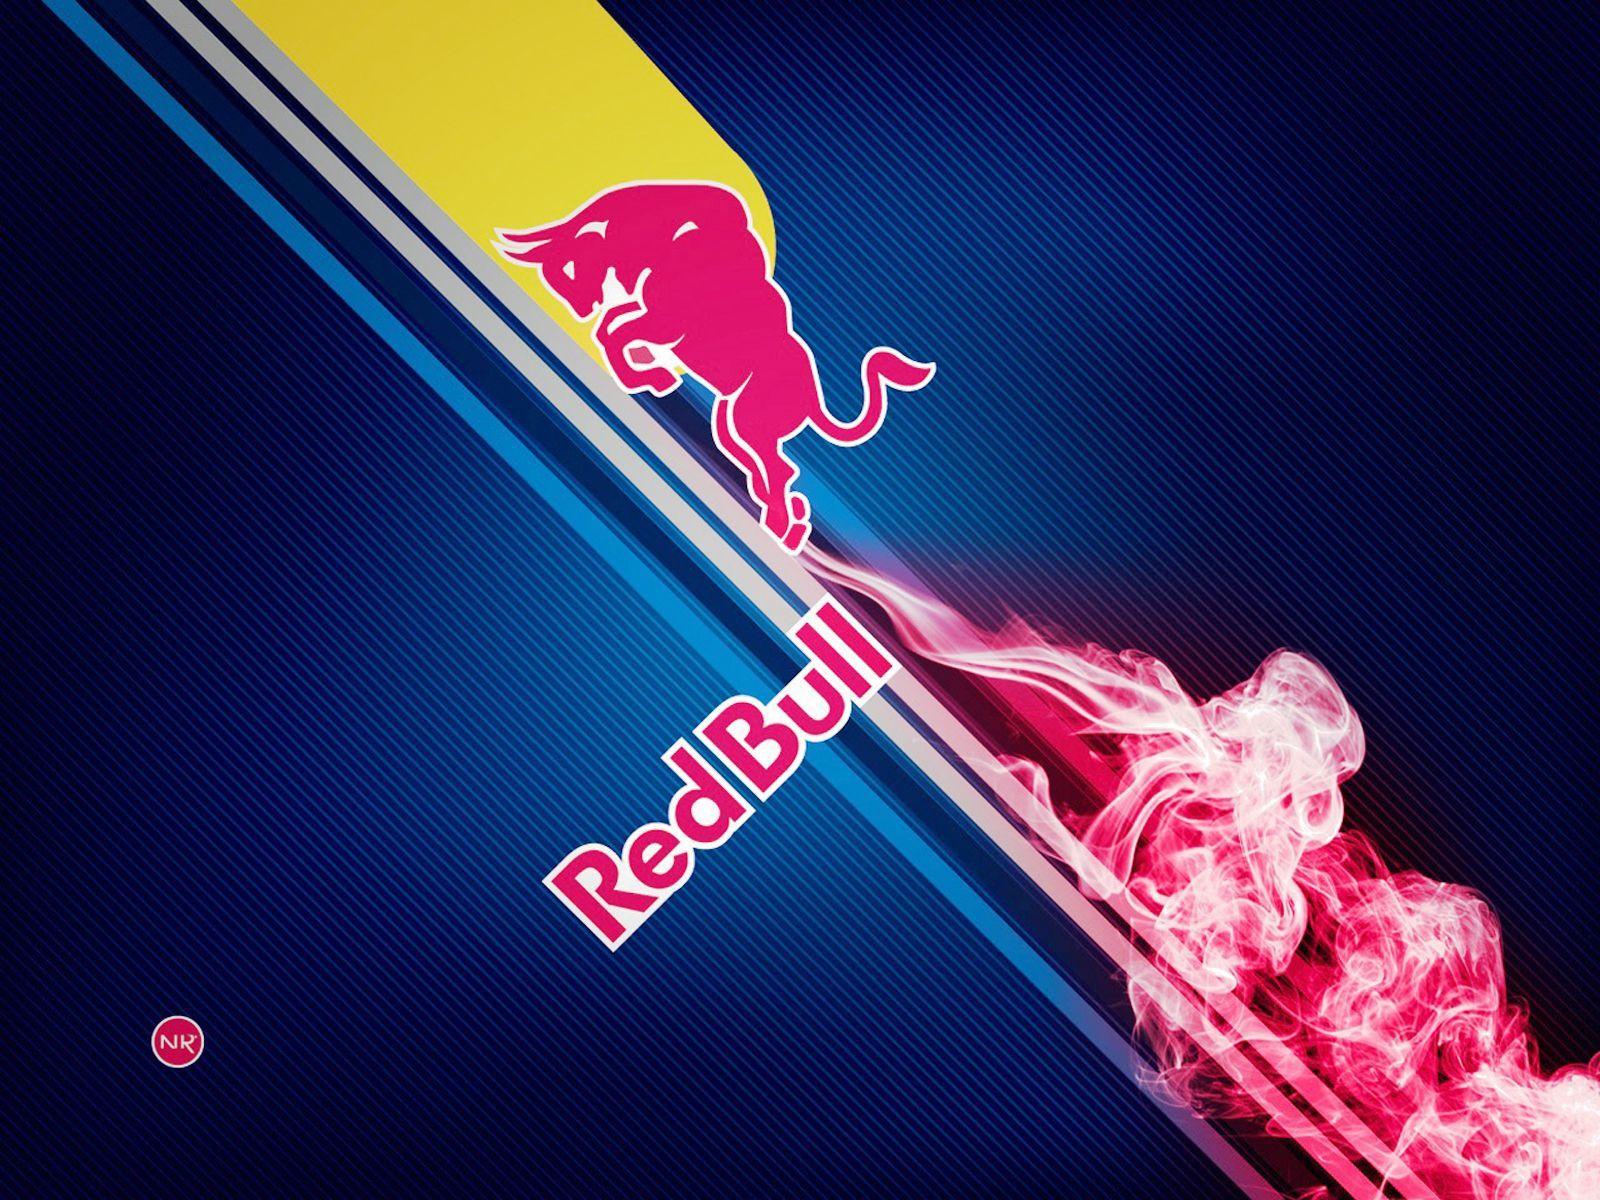 Red Bull Logo Wallpaper HD For Desktop Collection. しし